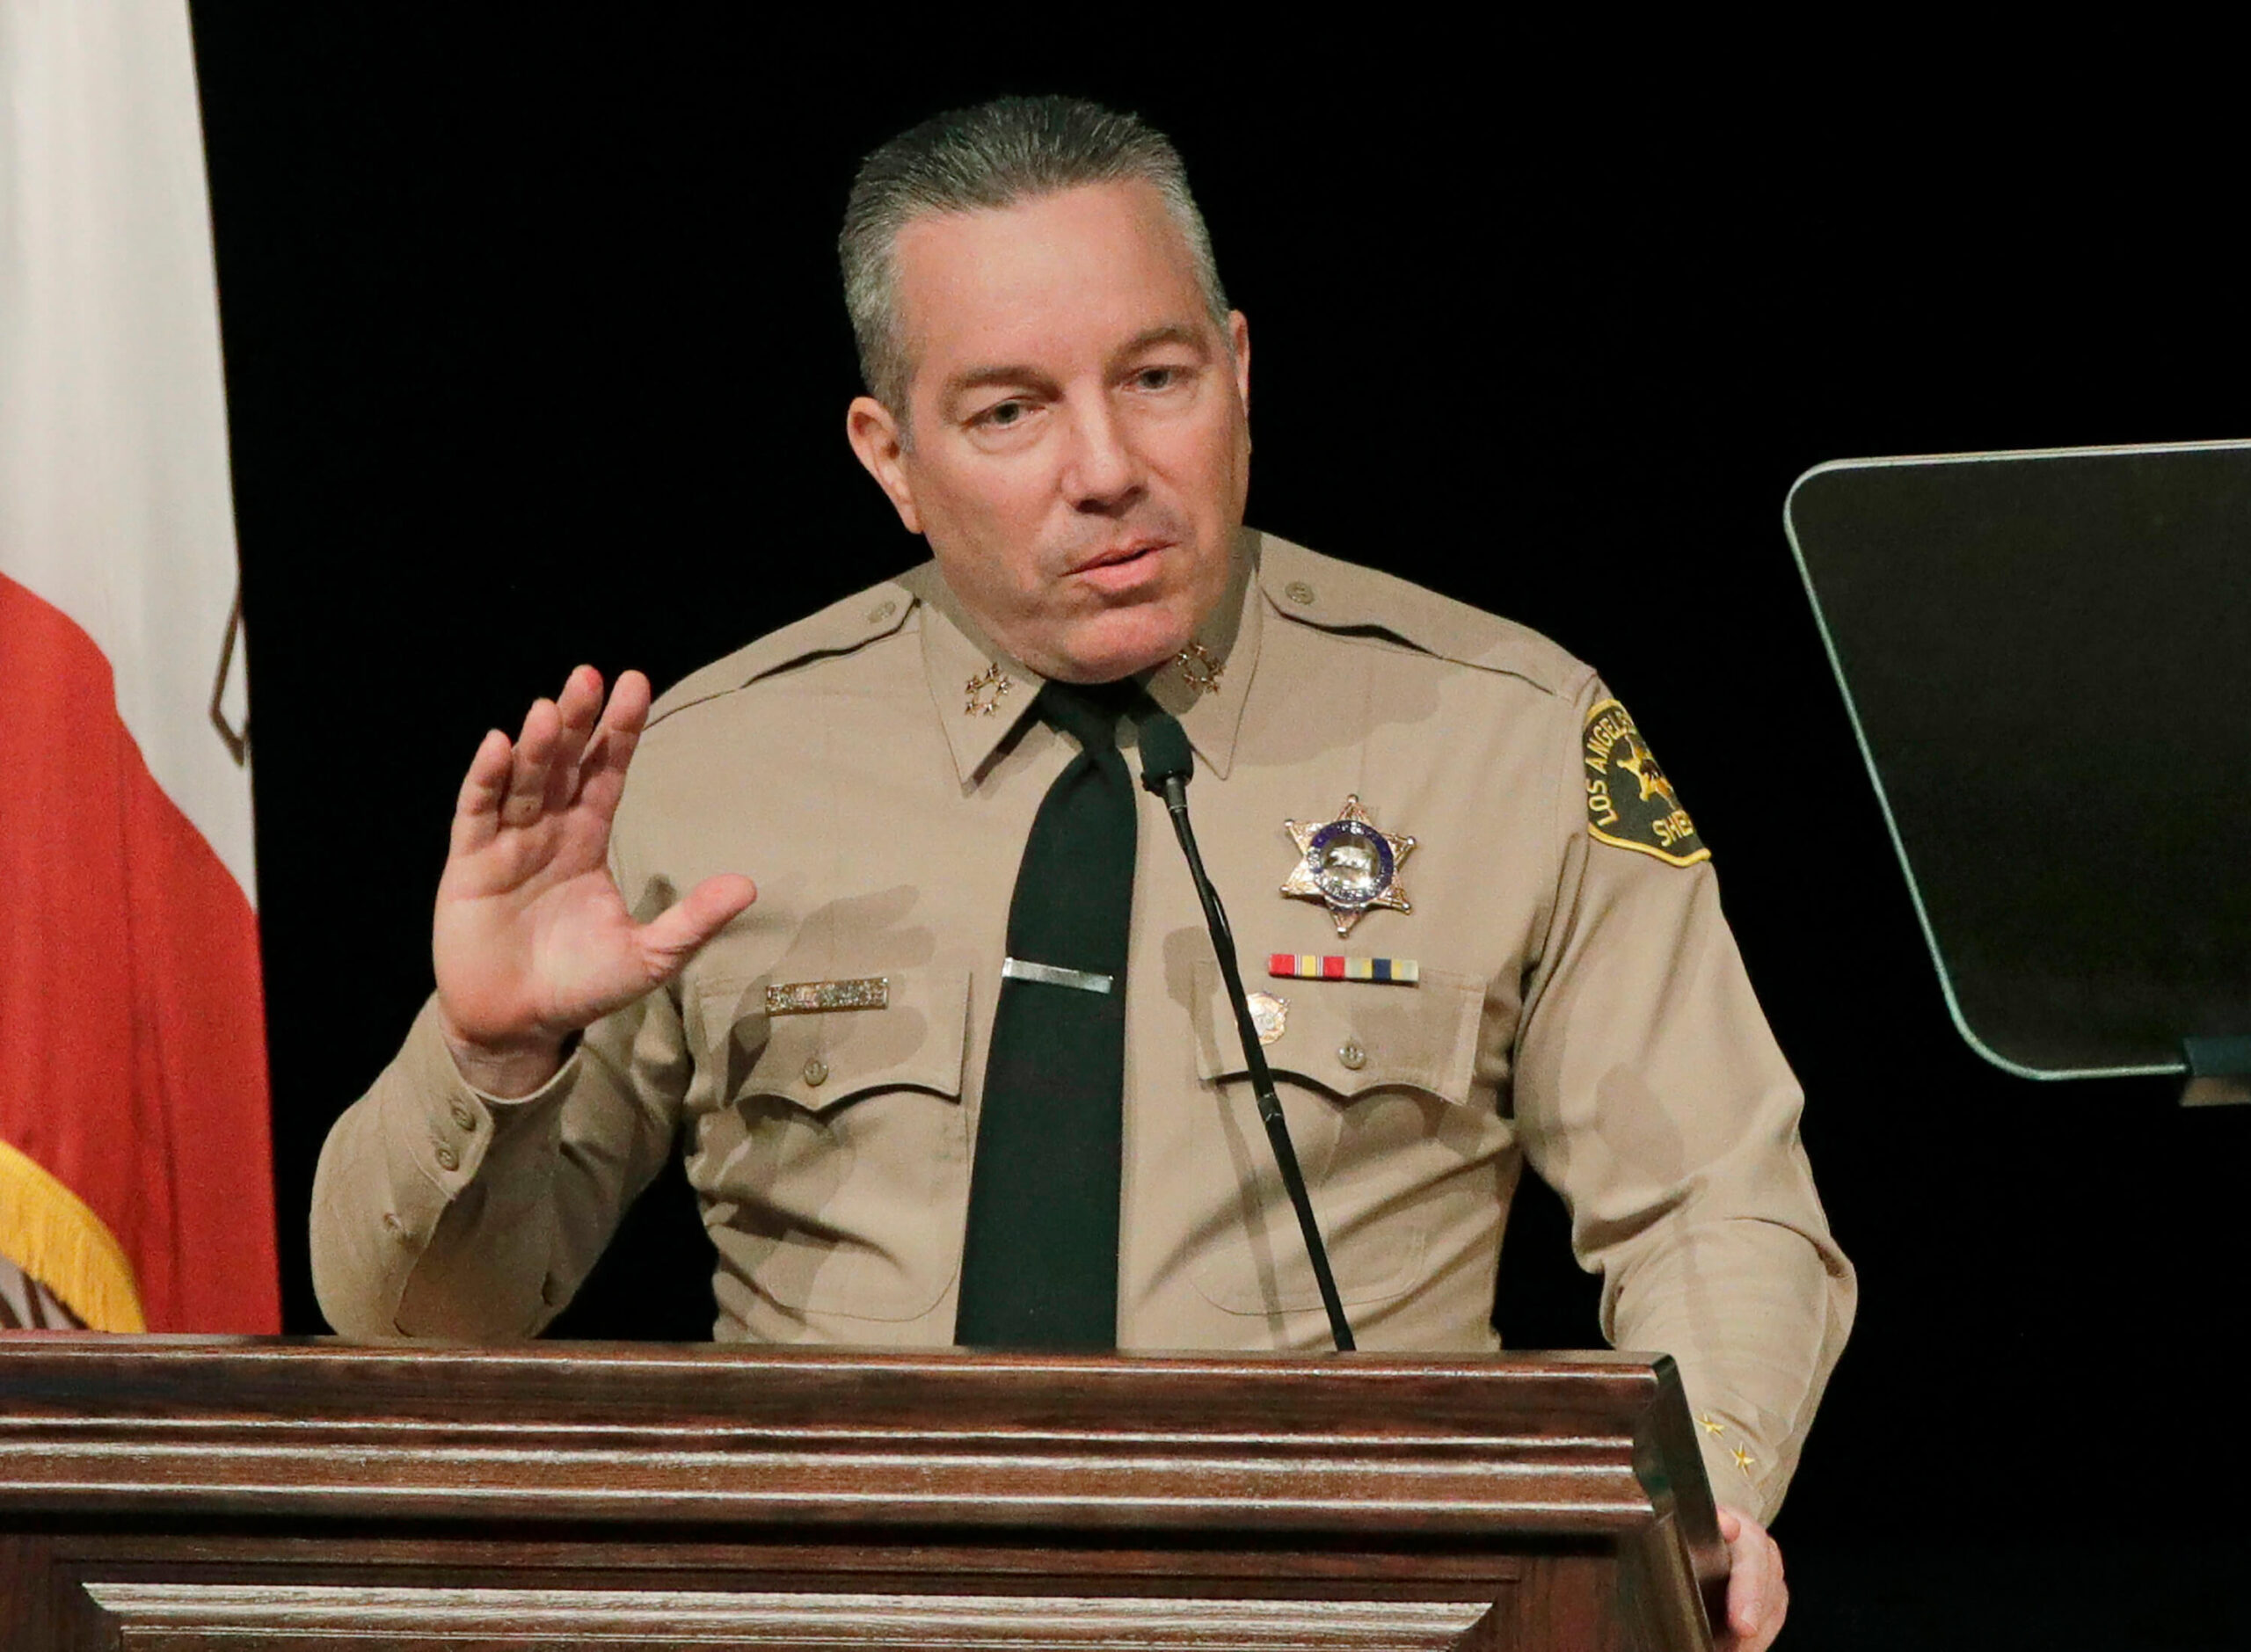 Sheriff of Los Angeles County